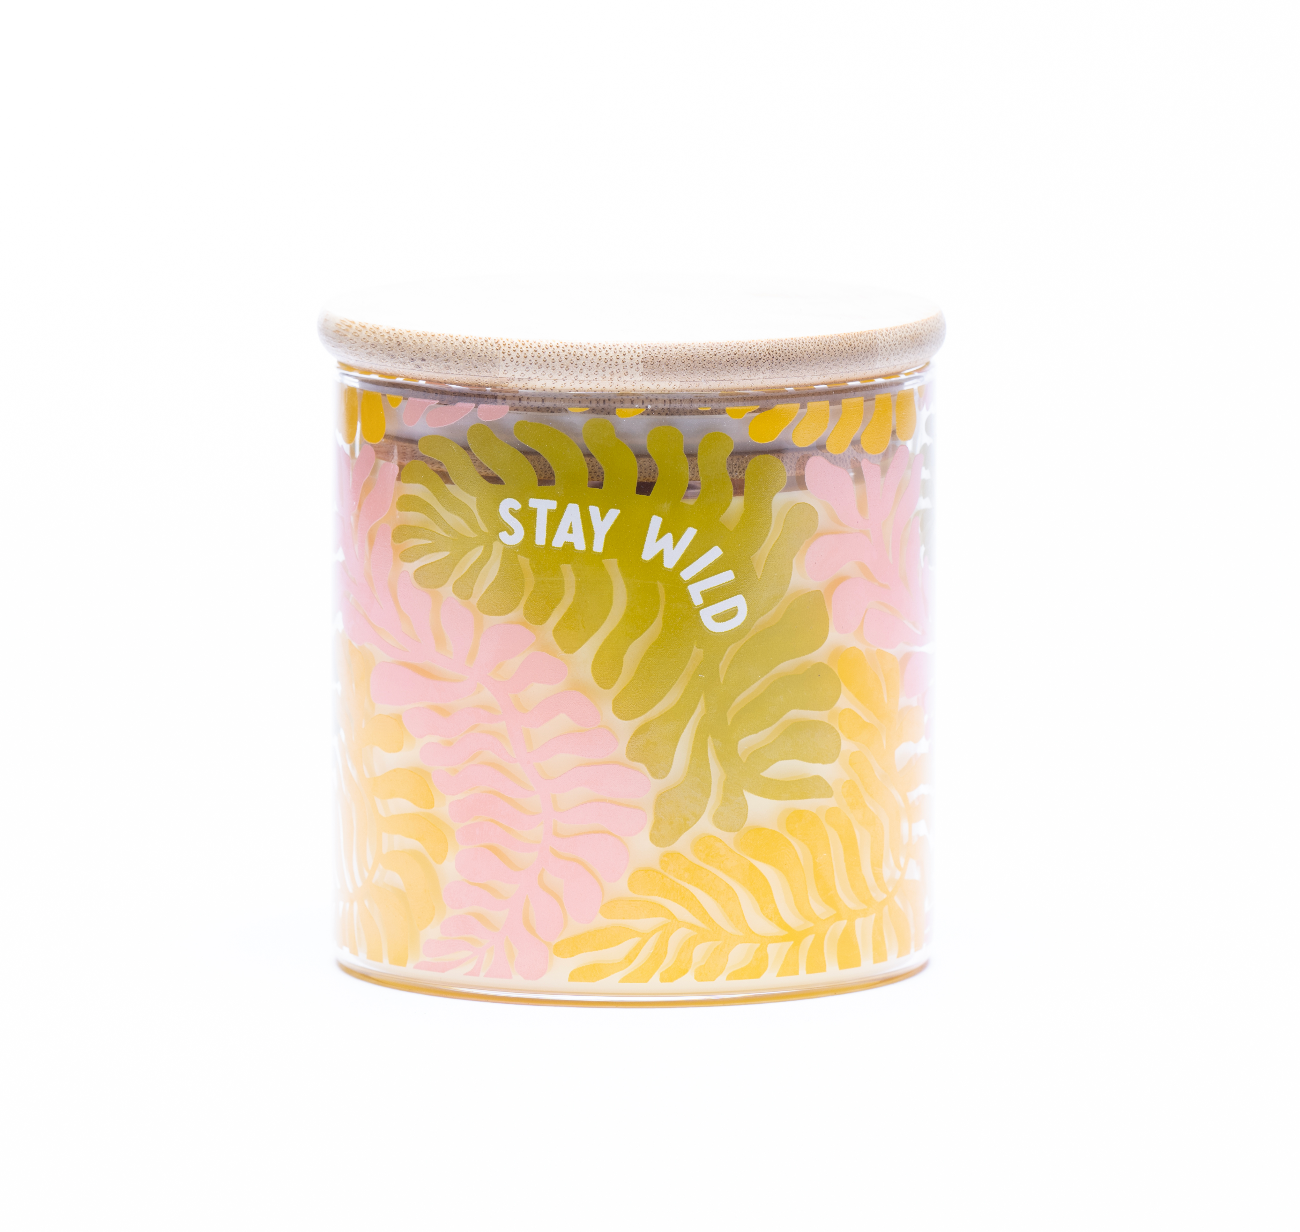 Stay Wild 100% Soy Wax & Essential Oil Blend Candle